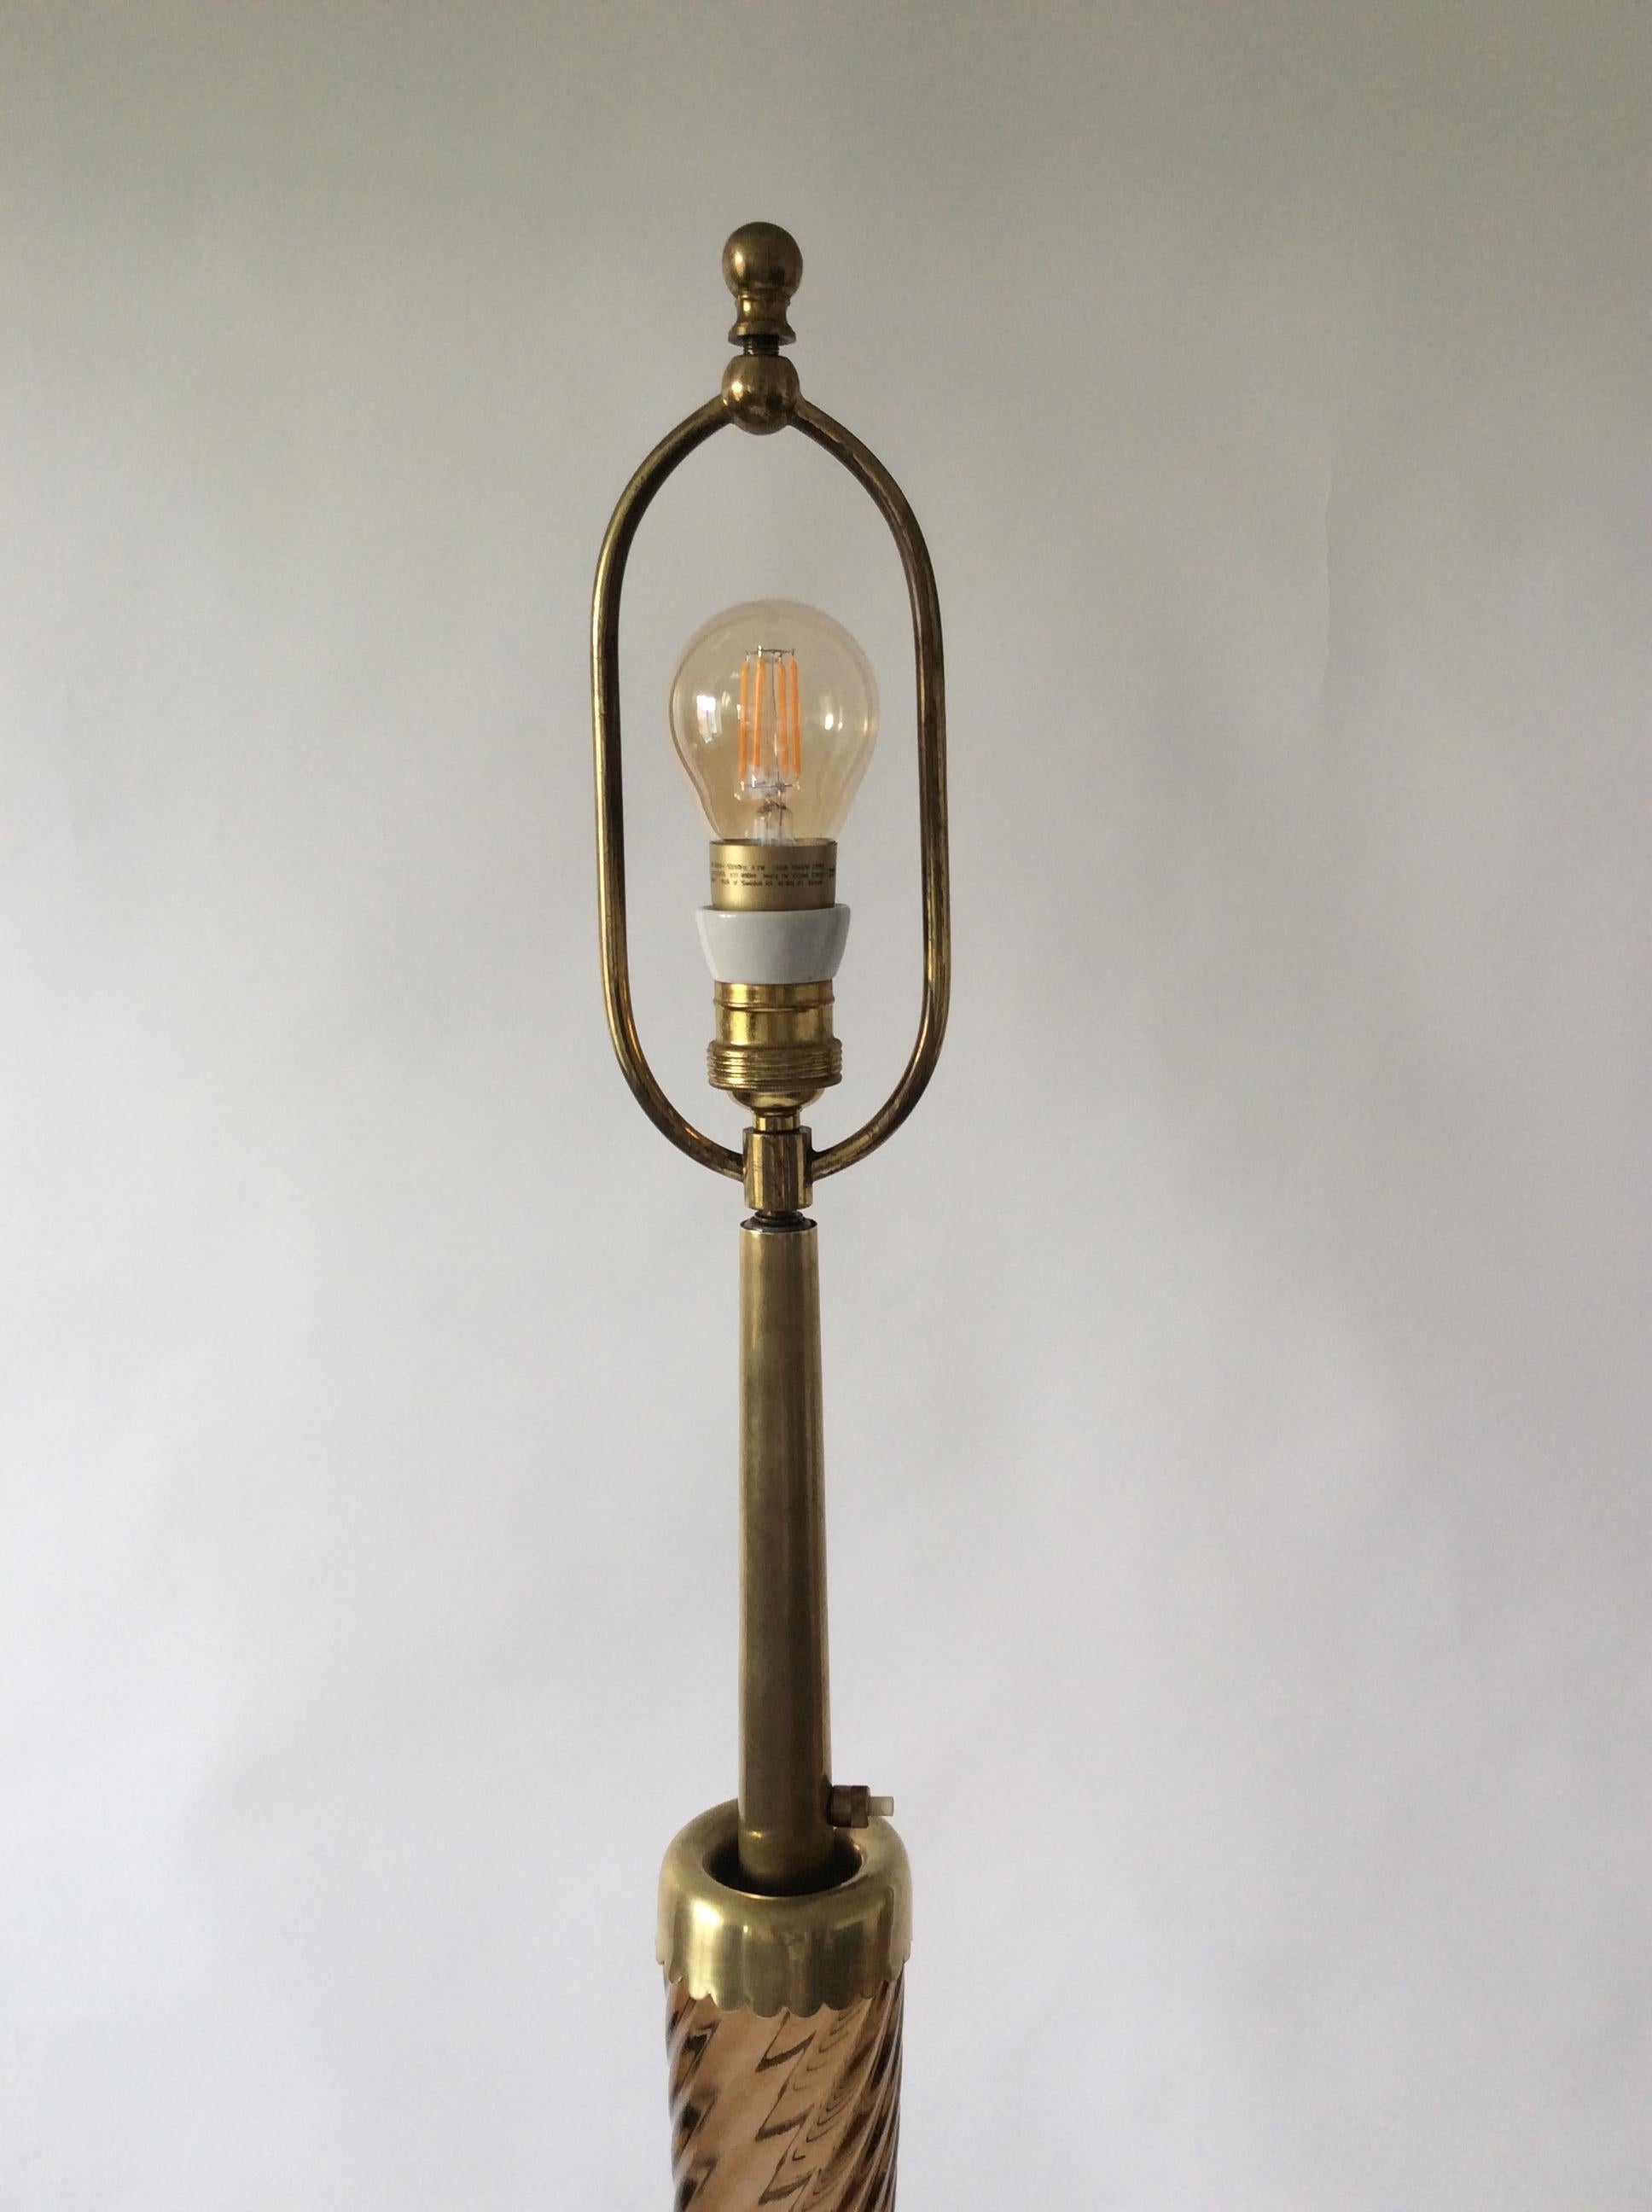 Elegant and beautiful 1950s Venini Murano glass floor lamp in
a nice smokey topaz color. The lamp have a stunning revers
tapered design and roundel bottom foot with a swirled glass
detail. This older Venini pieces are becoming rare and very hard